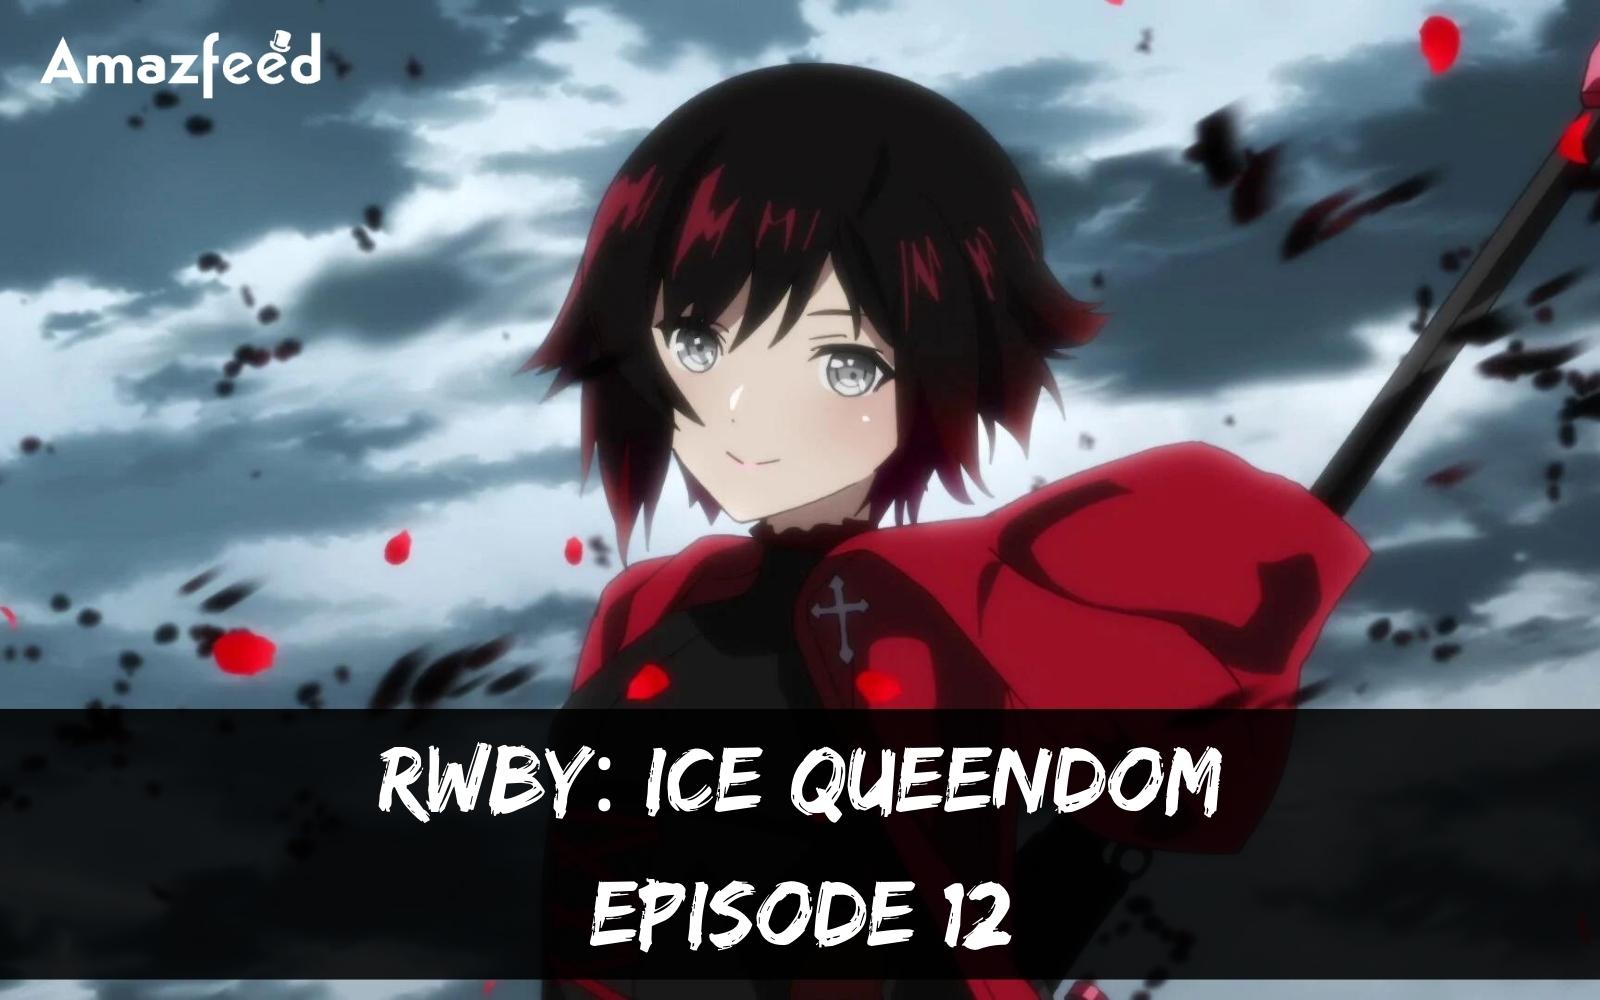 RWBY: Ice Queendom Episode 12 ⇒ Countdown, Release Date, Spoilers, Premiere Time, Where to Watch & Recap